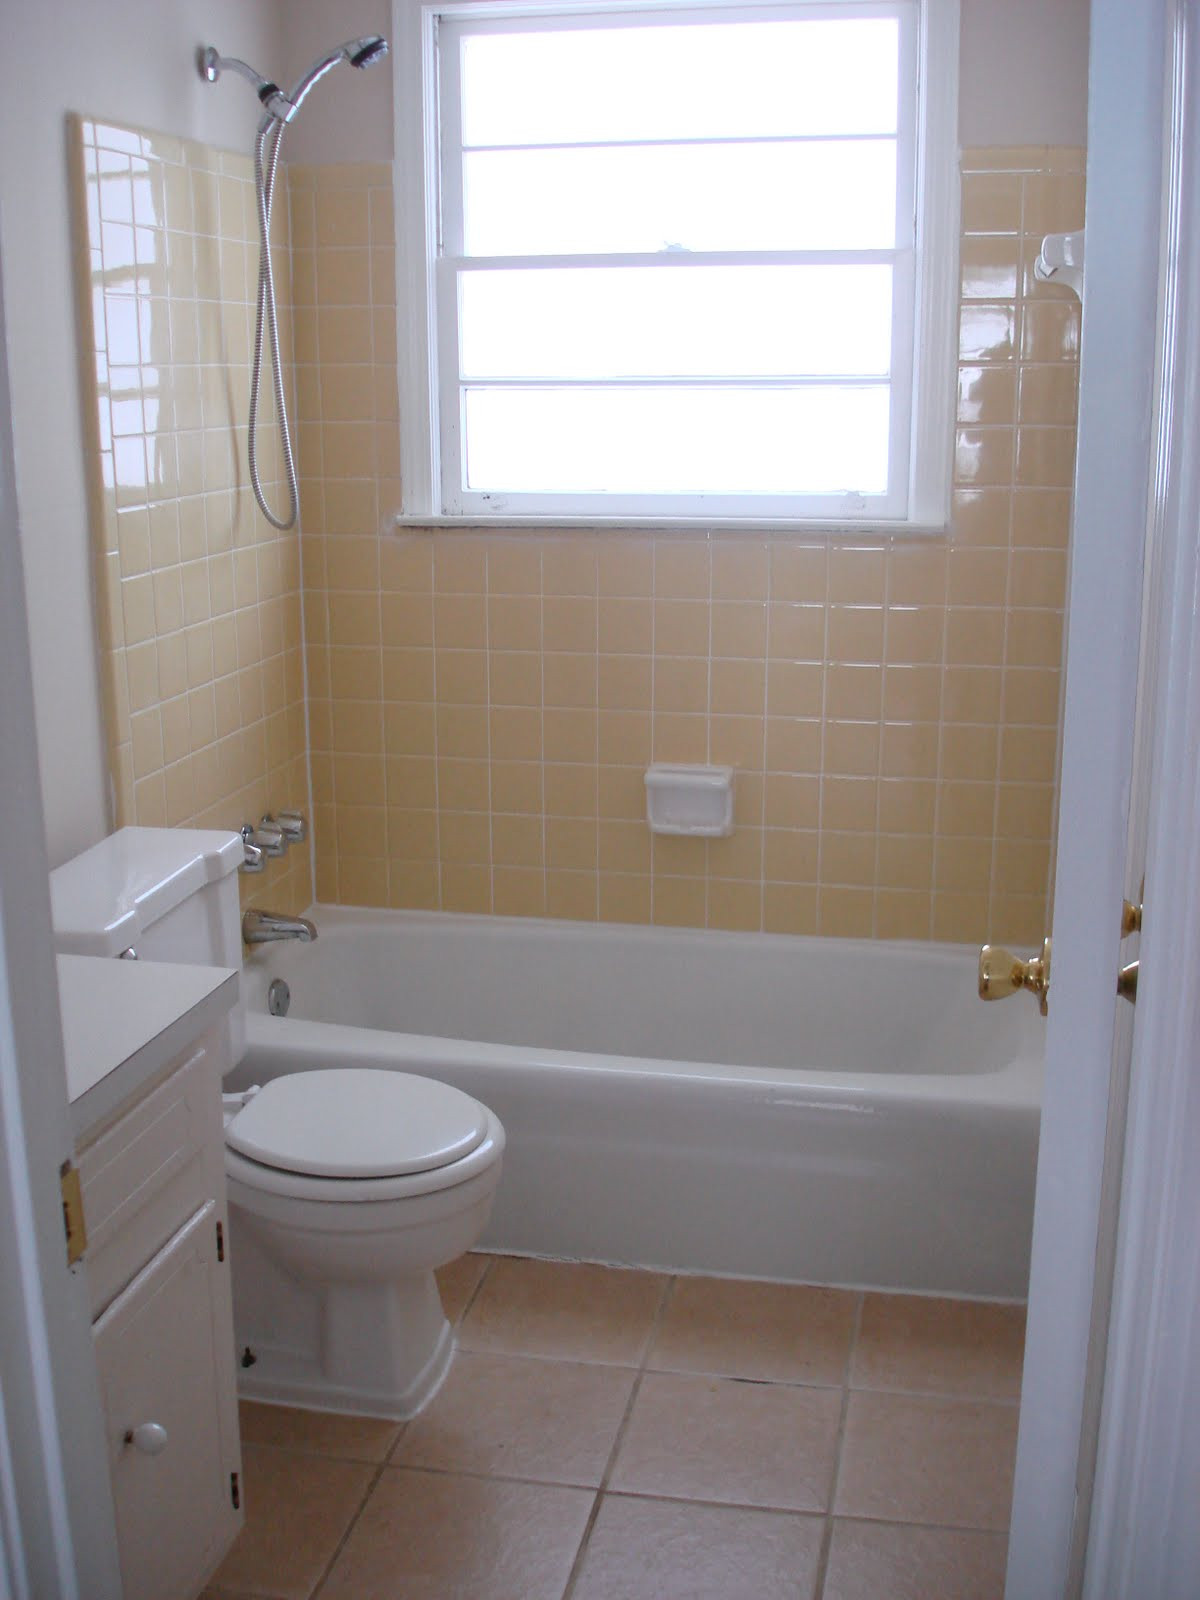 Ceramic Tiles For Bathroom
 It s Not Rocket Science RIP yellow bathroom tile or